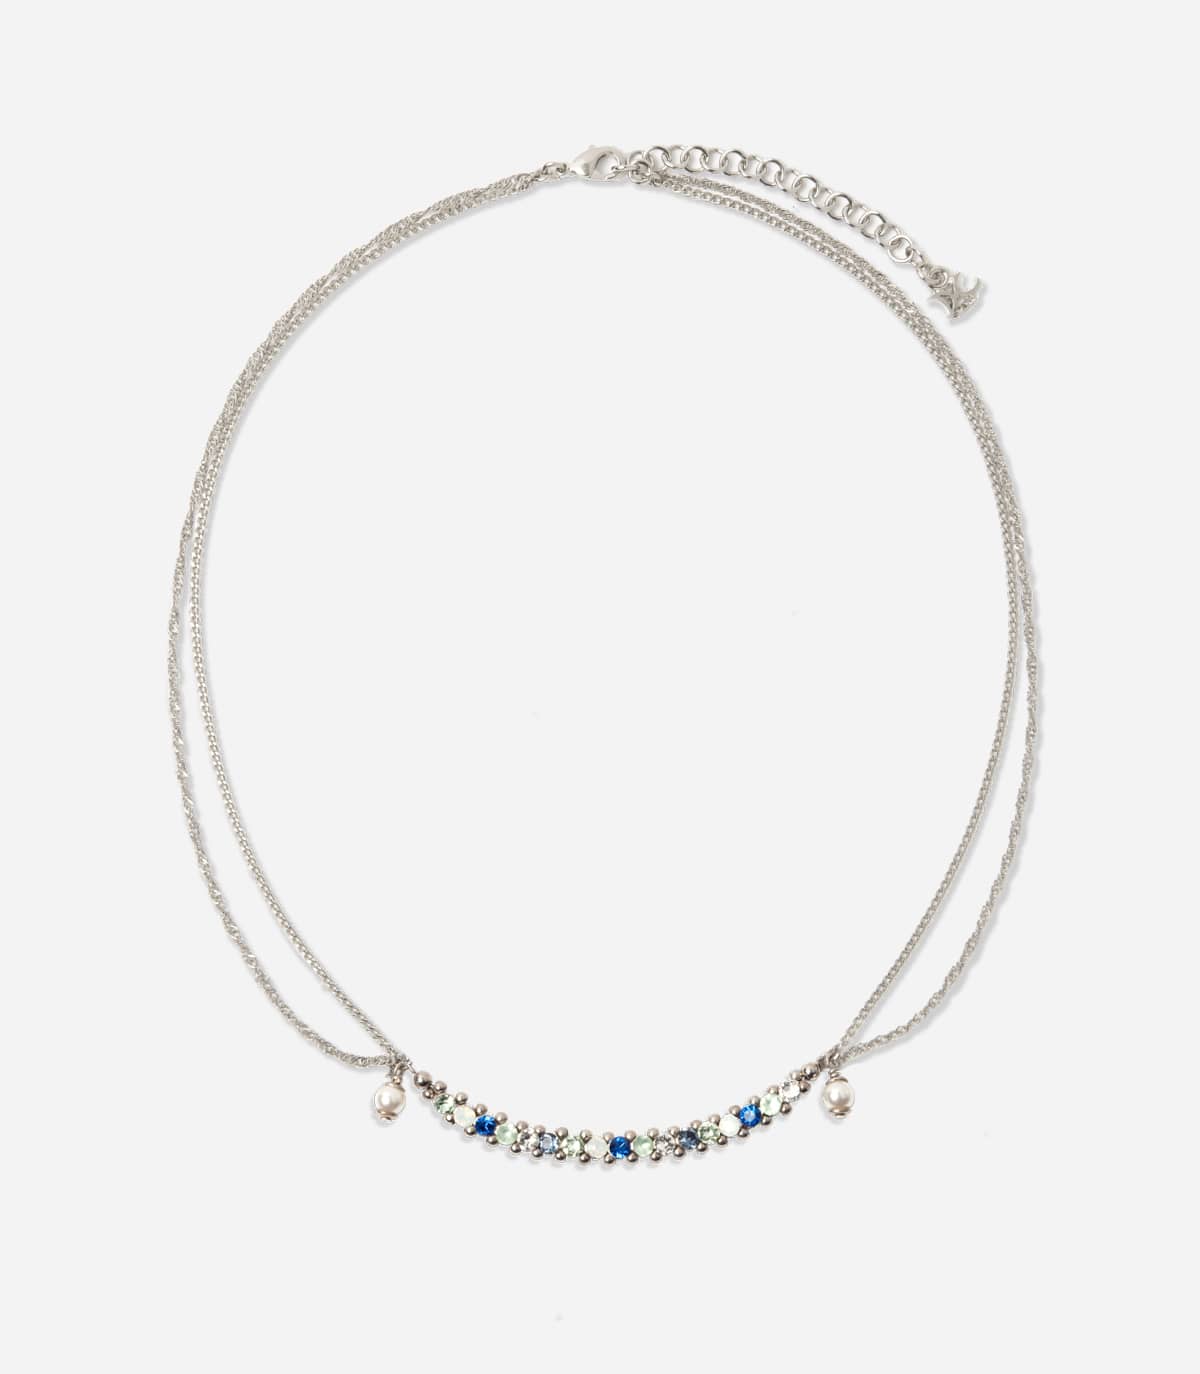 MOON JELLY THIN NECKLACE - Collier - Delphine-Charlotte Parmentier